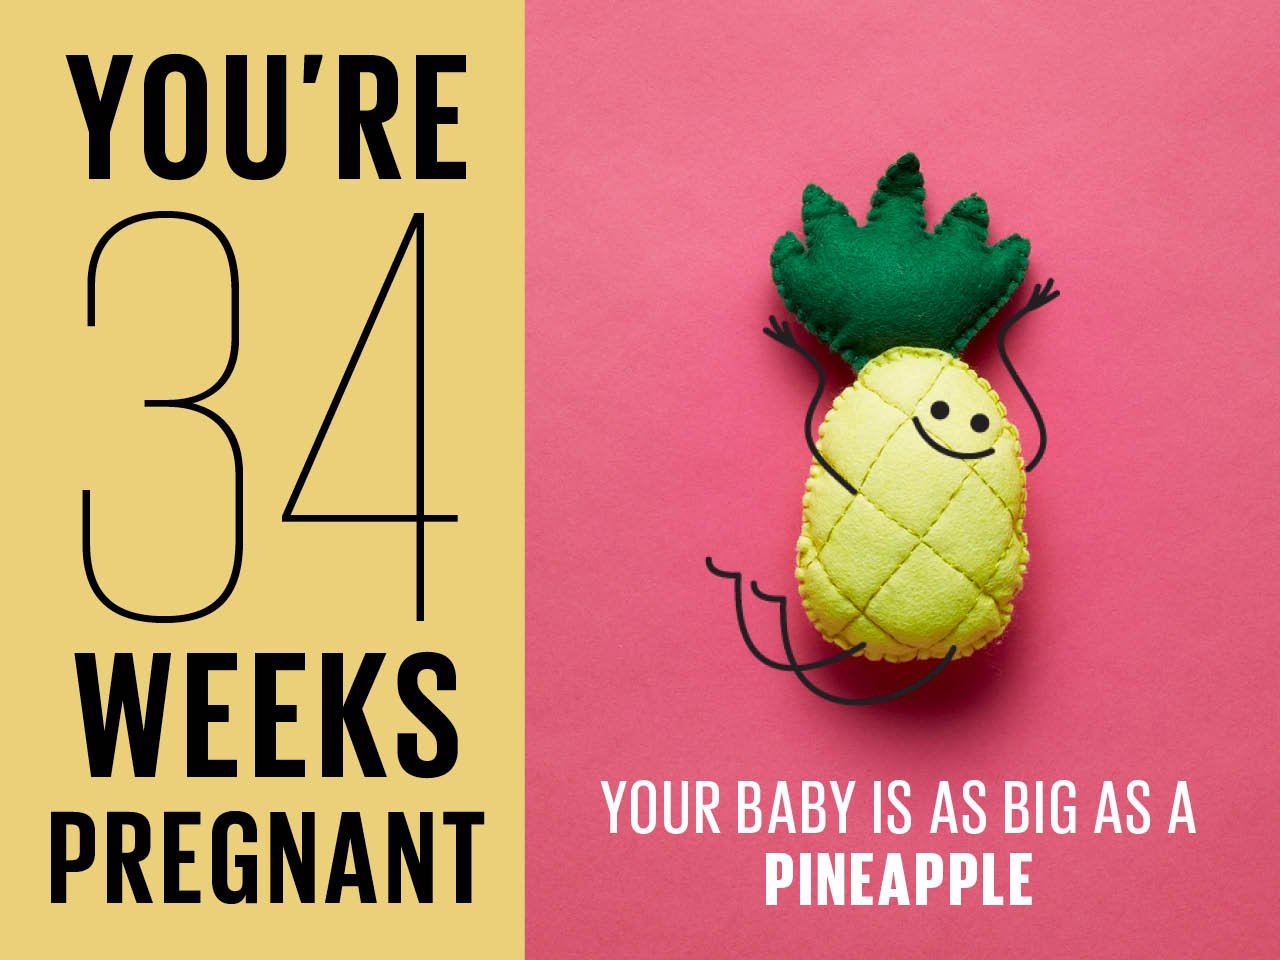 Felt pineapple used to show how big baby is at 34 weeks